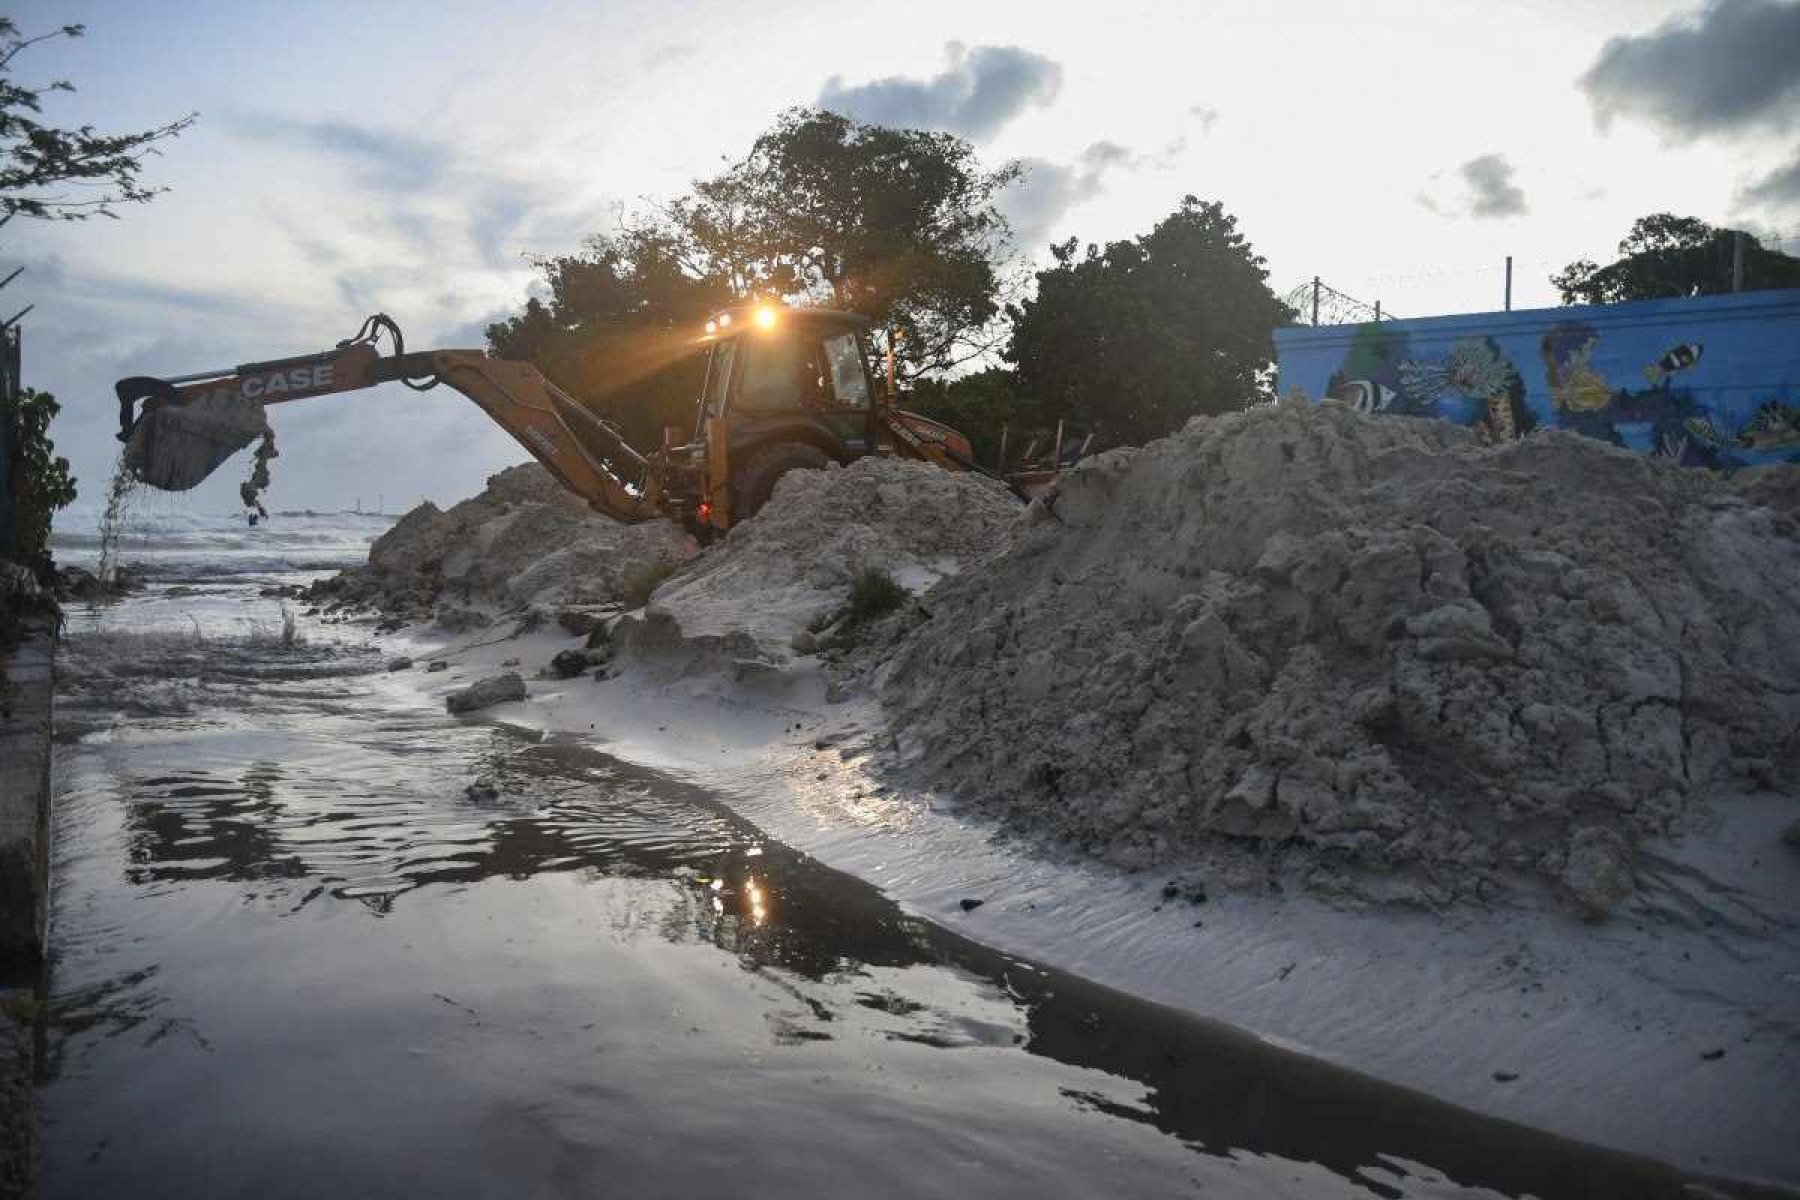  Staff from the Ministry of Transport, Works and Infrastructure clear sand from the drain after the passage of Hurricane Beryl in Oistins gardens, Christ Church, Barbados on July 1, 2024. (Photo by Randy Brooks / AFP)       